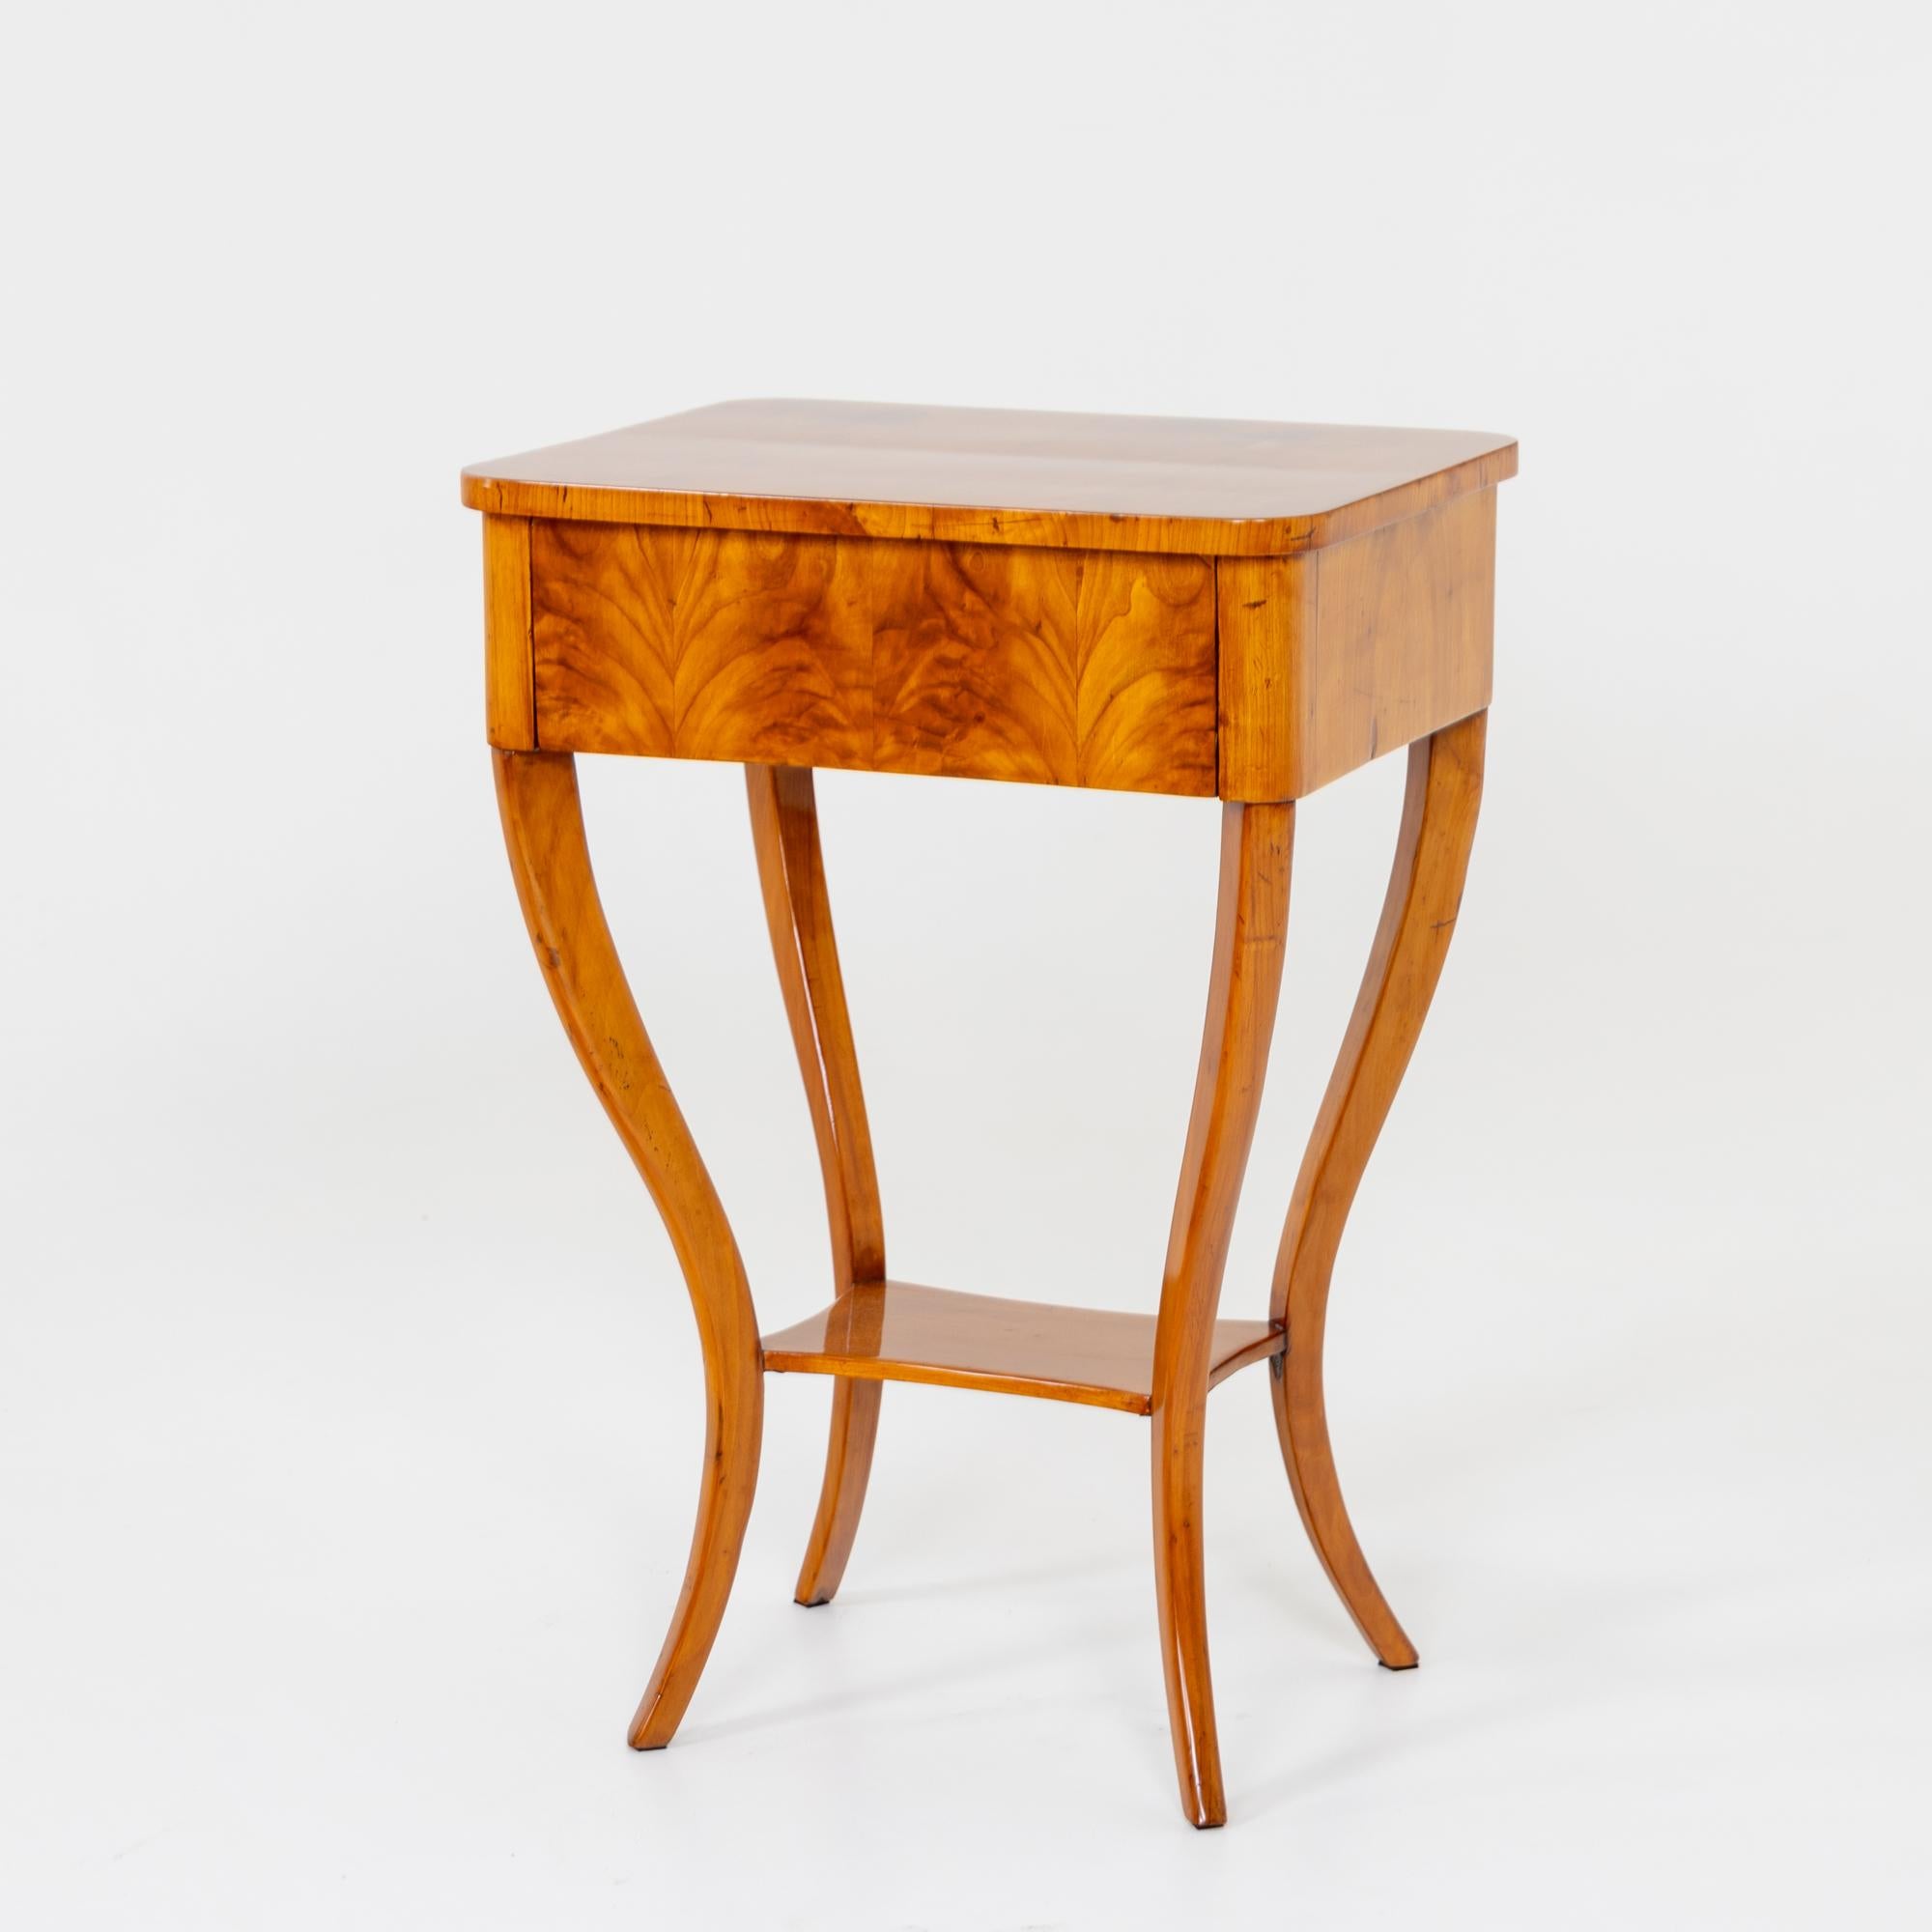 Small Biedermeier side table with high s-shaped legs and a small intermediate board. Above it rises the table top with a drawer and smooth frame. The table is veneered in cherry and has been polished by hand.